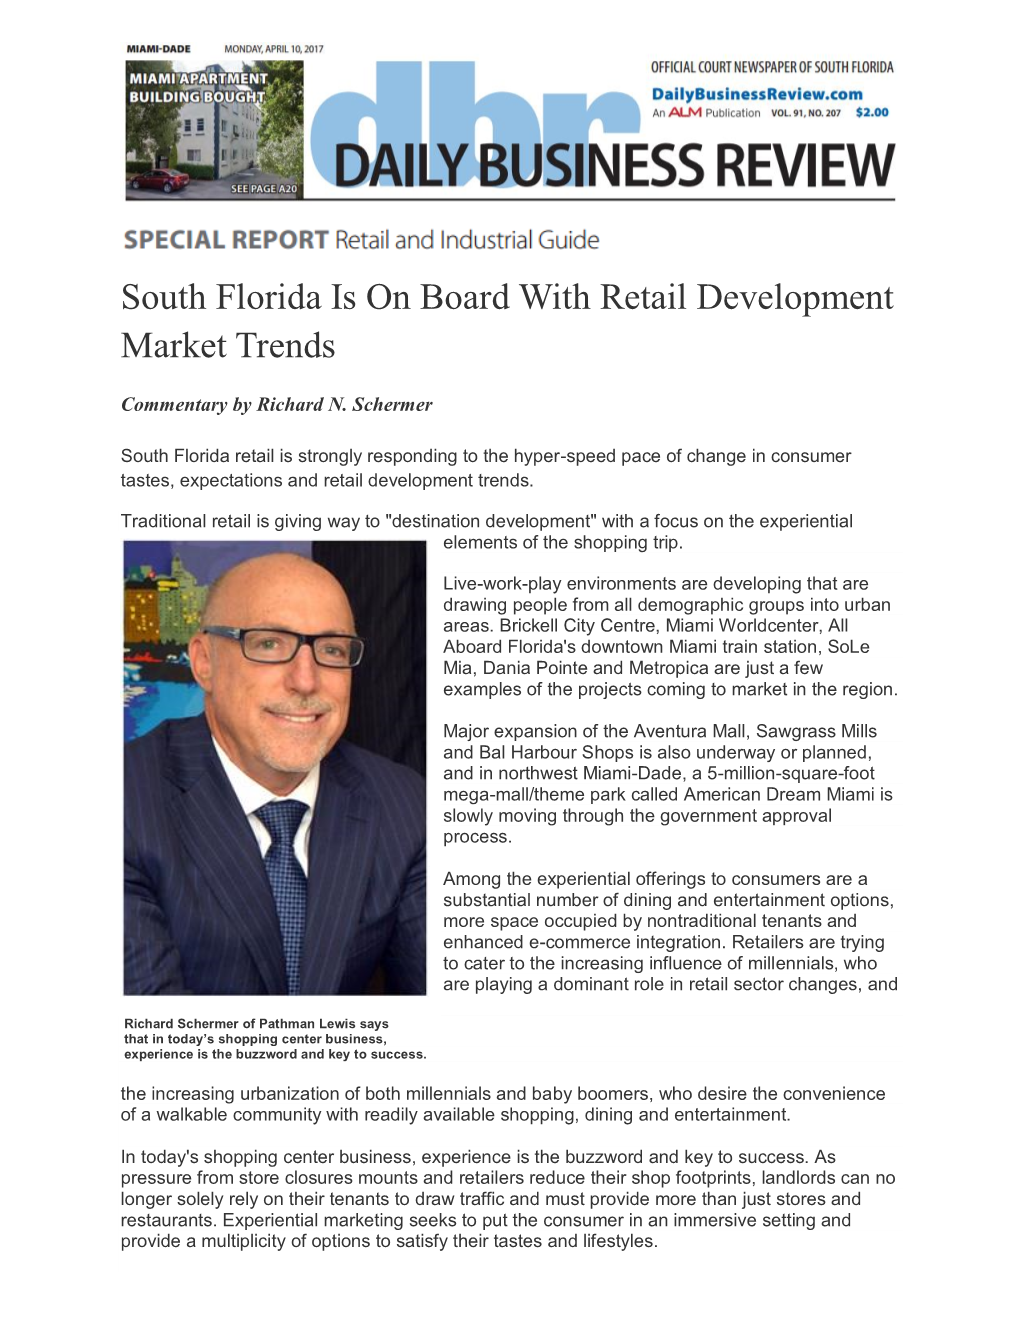 South Florida Is on Board with Retail Development Market Trends